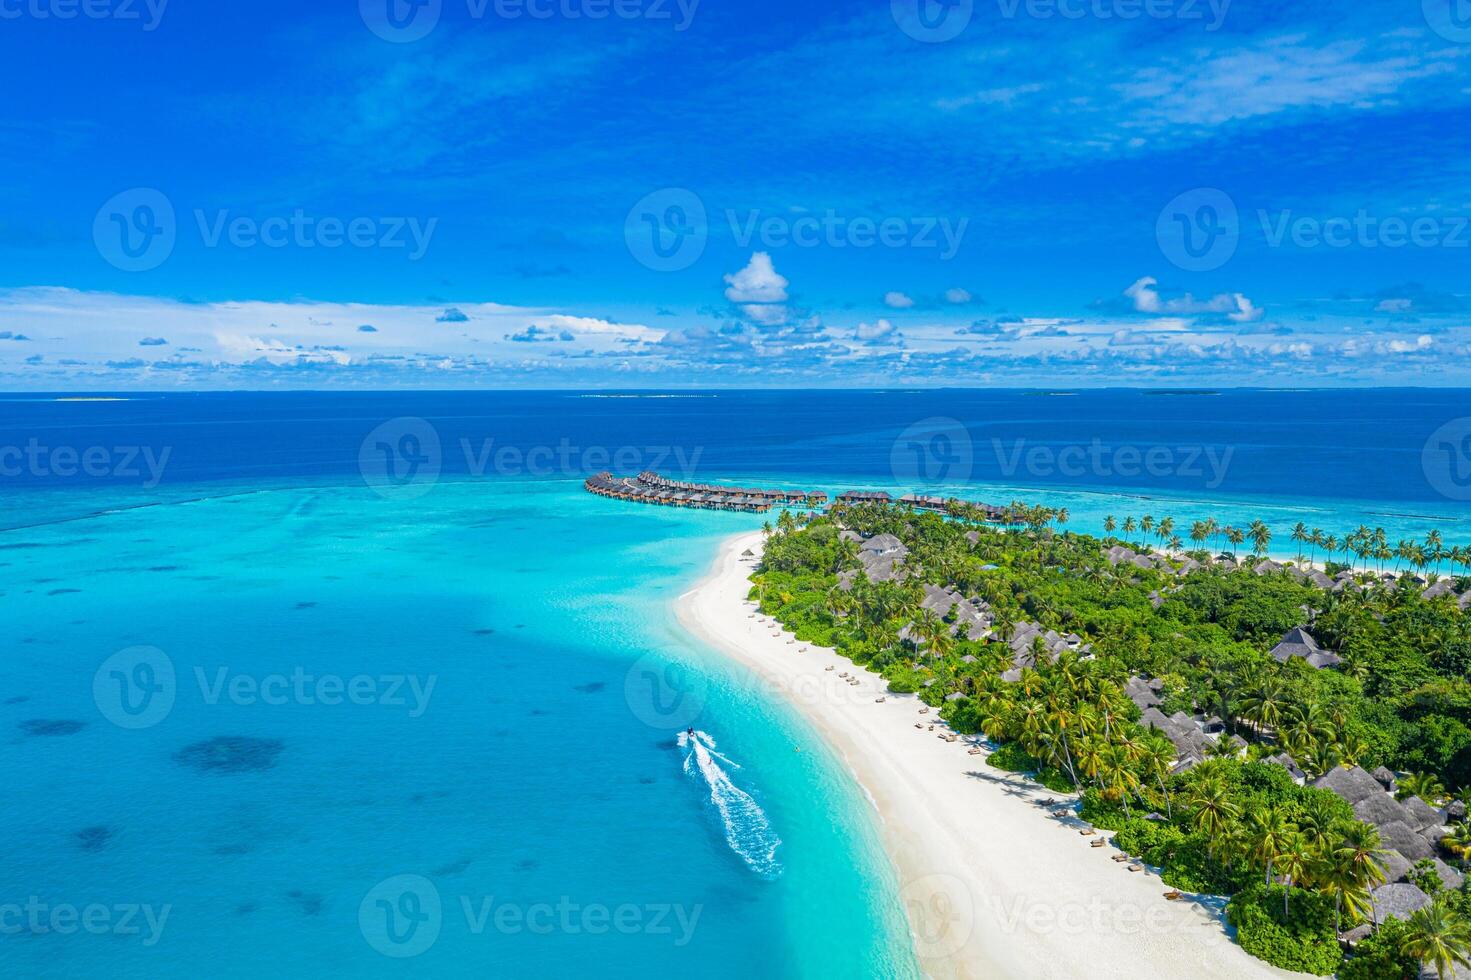 Stunning aerial landscape, luxury tropical resort with water villas. Beautiful island beach, palm trees, sunny sky. Amazing bird eyes view in Maldives, paradise coast. Exotic tourism, relax nature sea photo